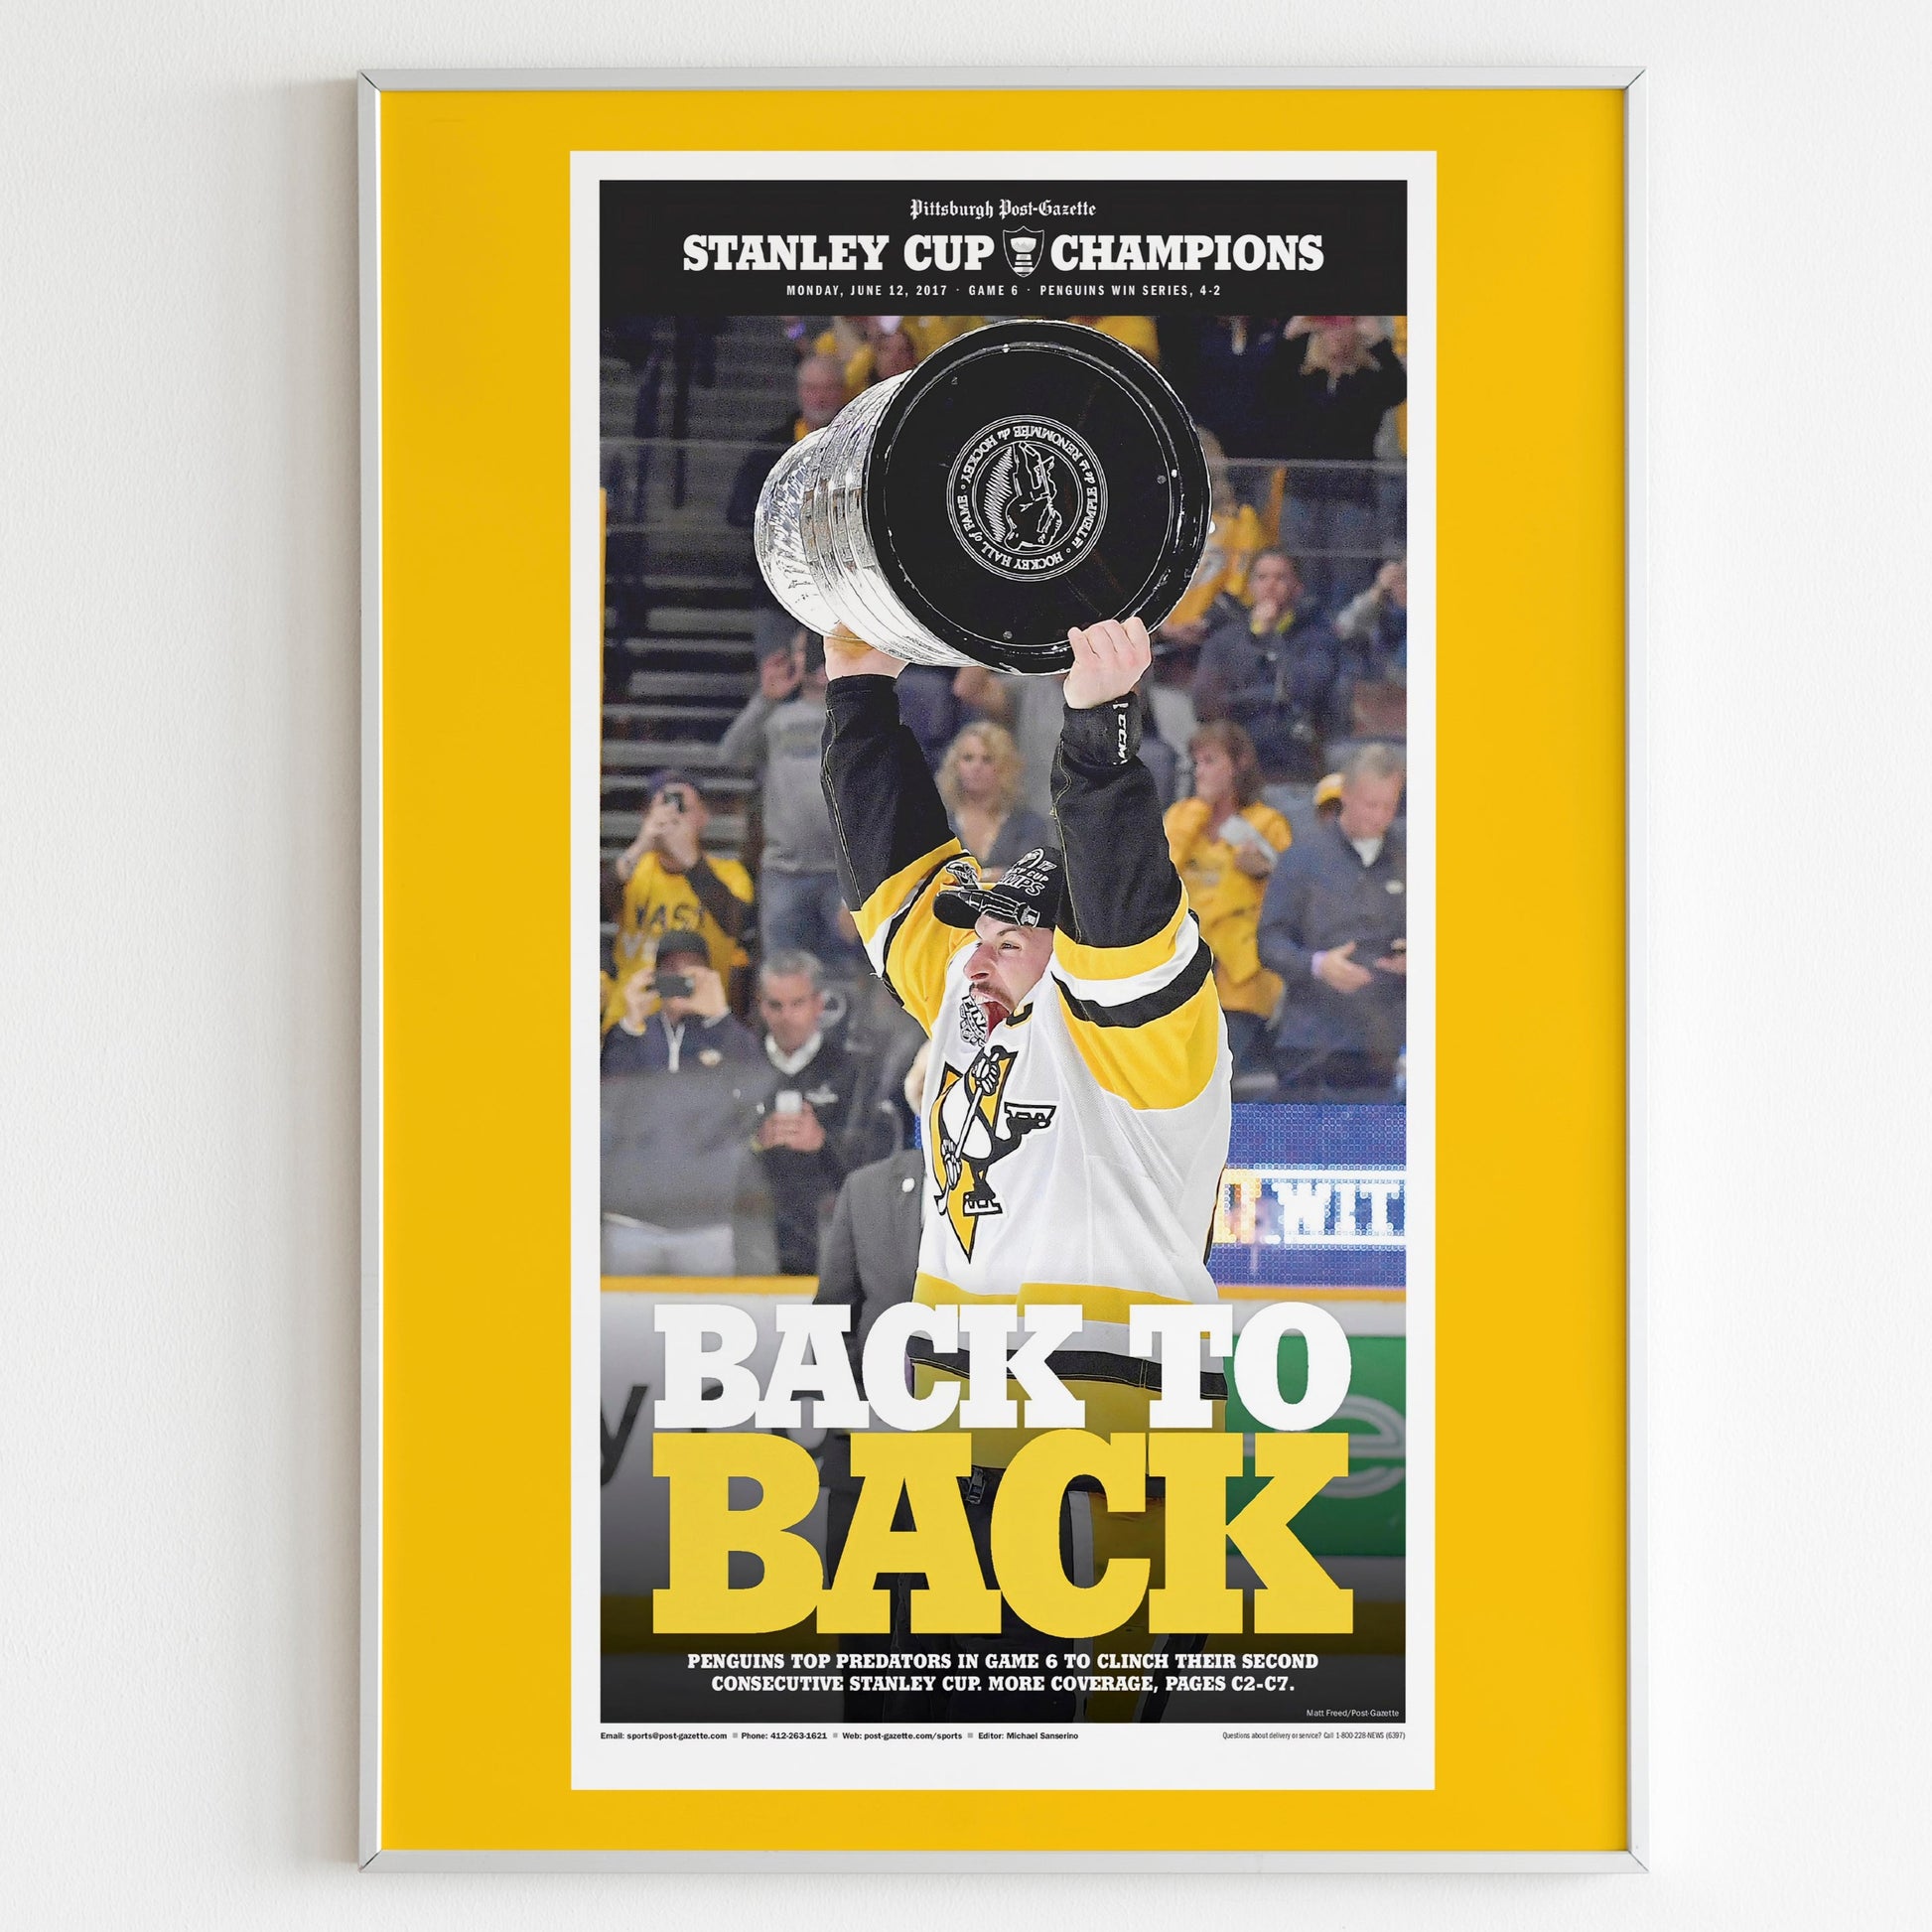 Pittsburgh Penguins 2017 NHL Stanley Cup Champions Front Cover Pittsburgh Post-Gazette Poster, Newspaper Front Page, Hockey Team Magazine